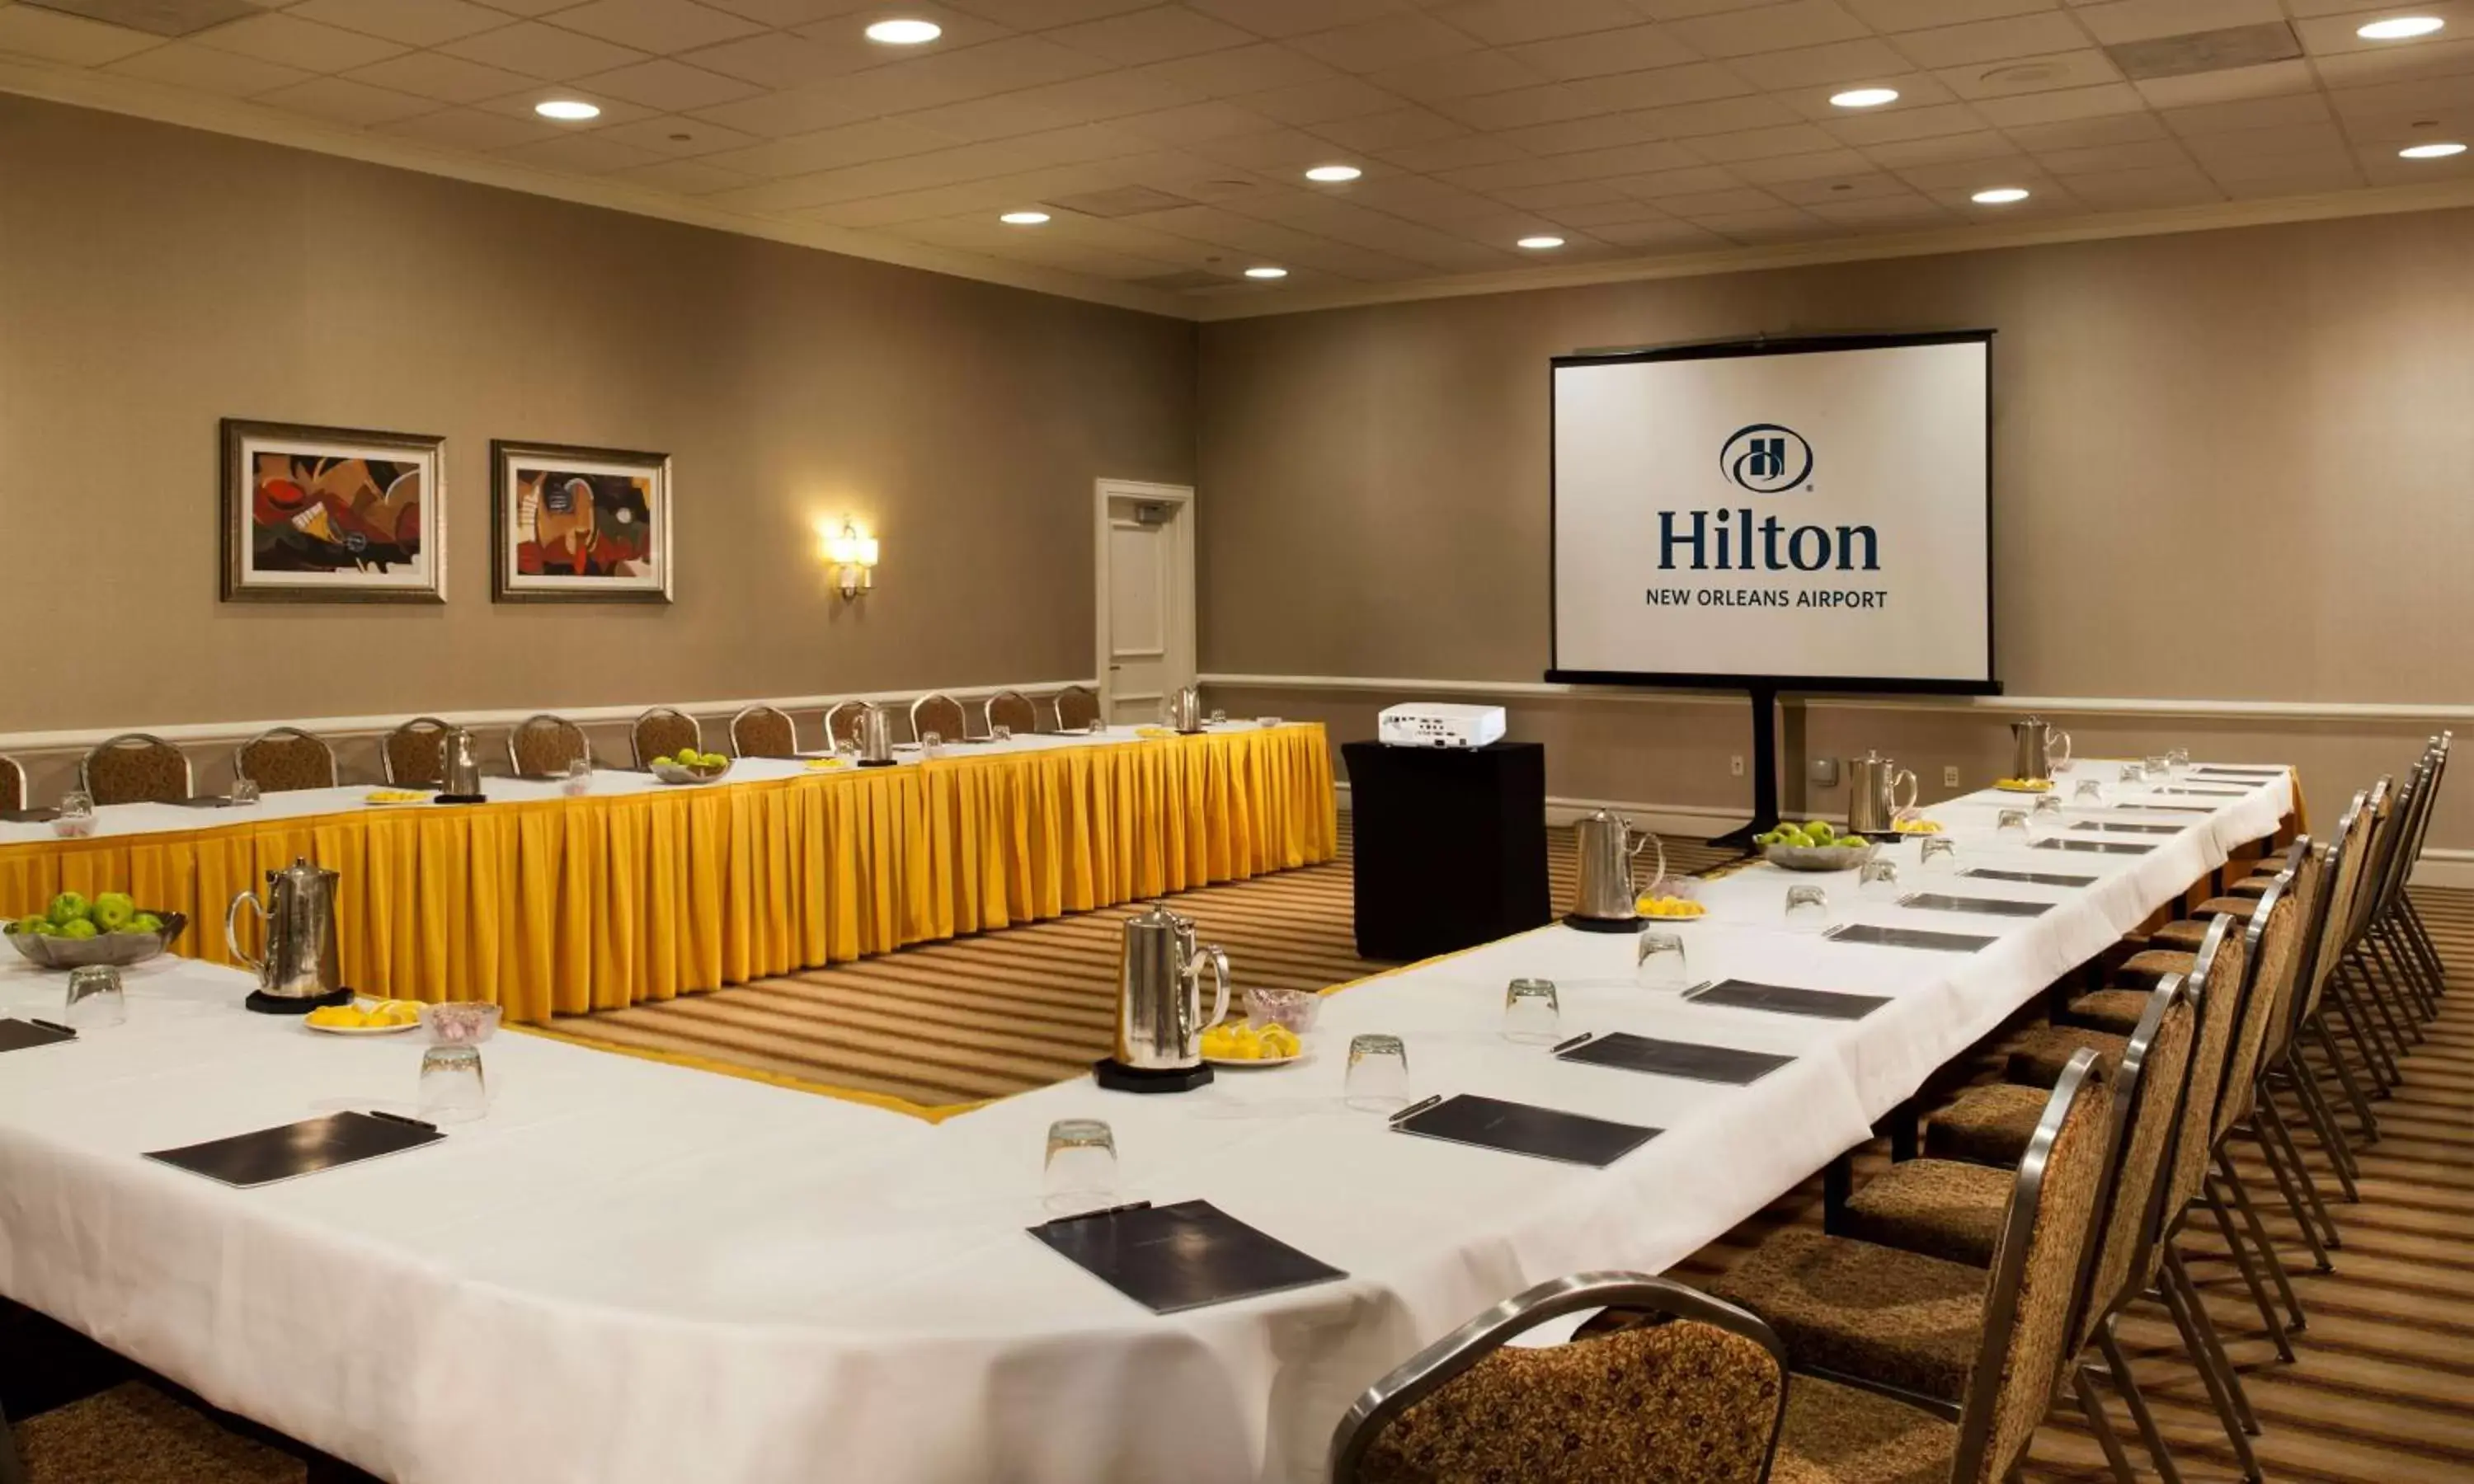 Meeting/conference room in Hilton New Orleans Airport